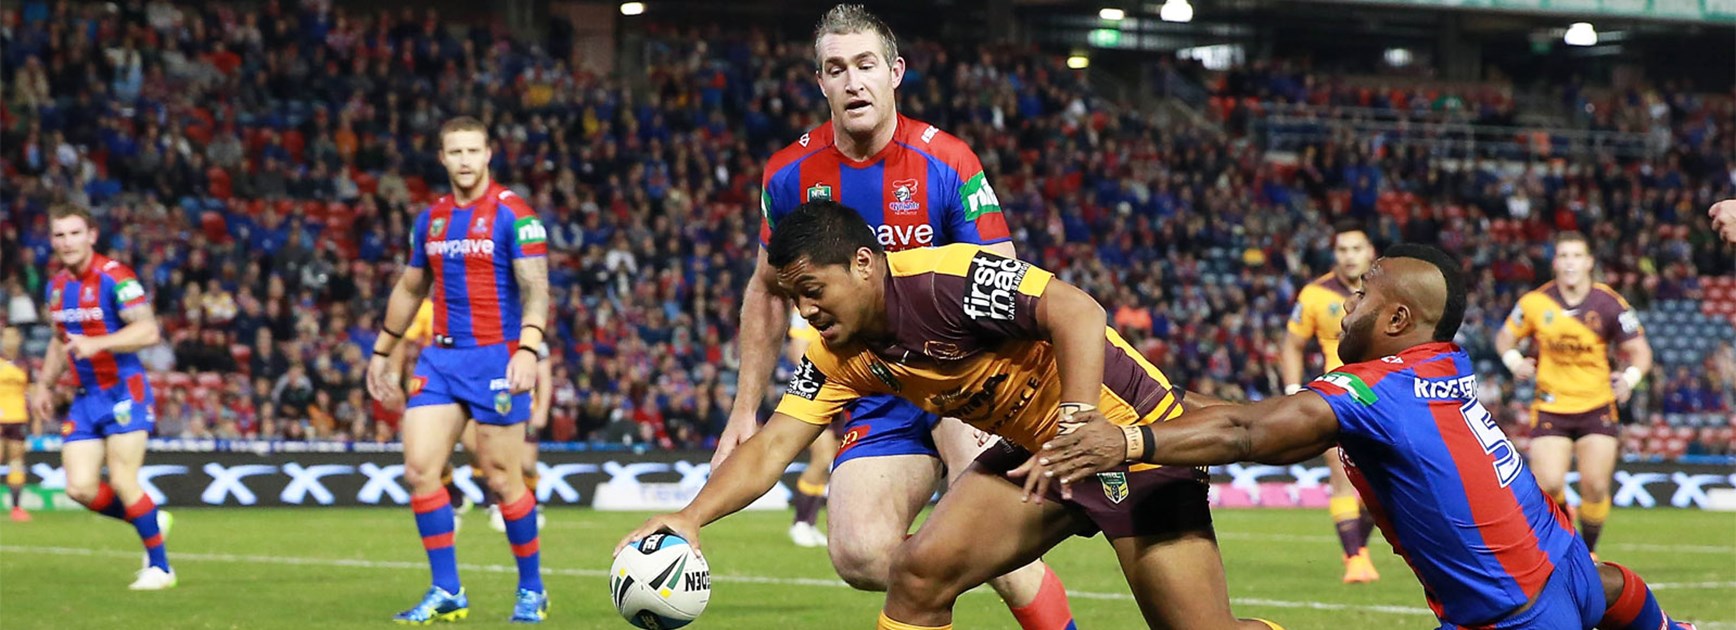 Anthony Milford scores the opening try for Brisbane against Newcastle on Monday night.